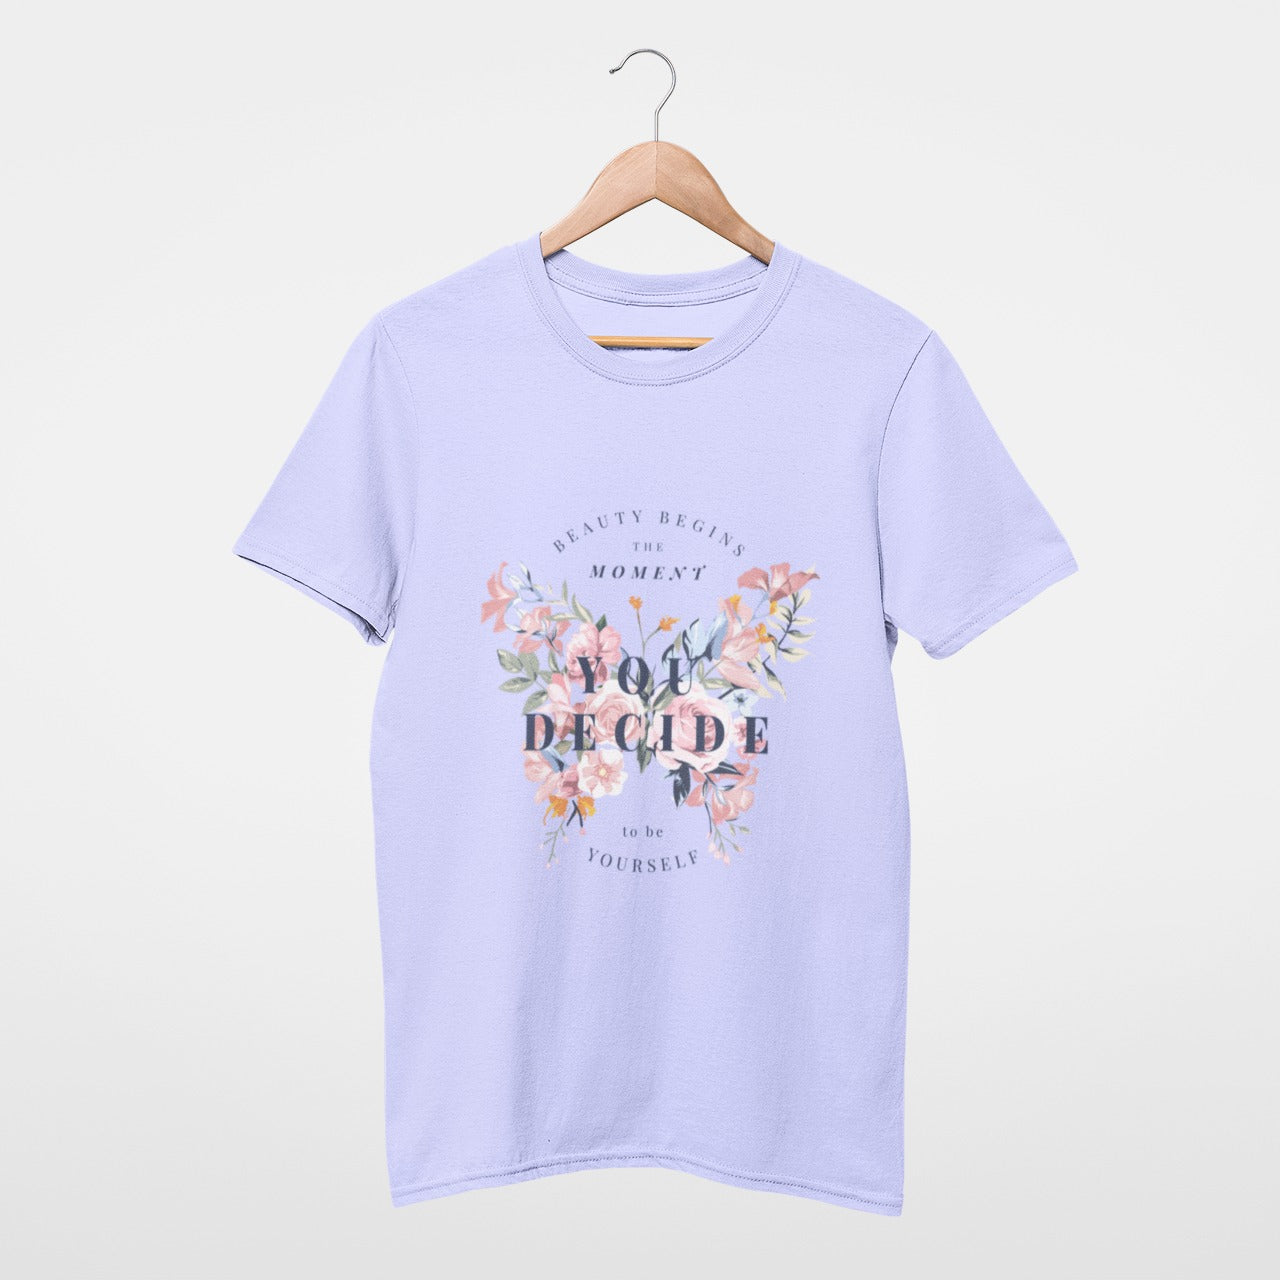 Beauty begins the moment you decide to be yourself Tee